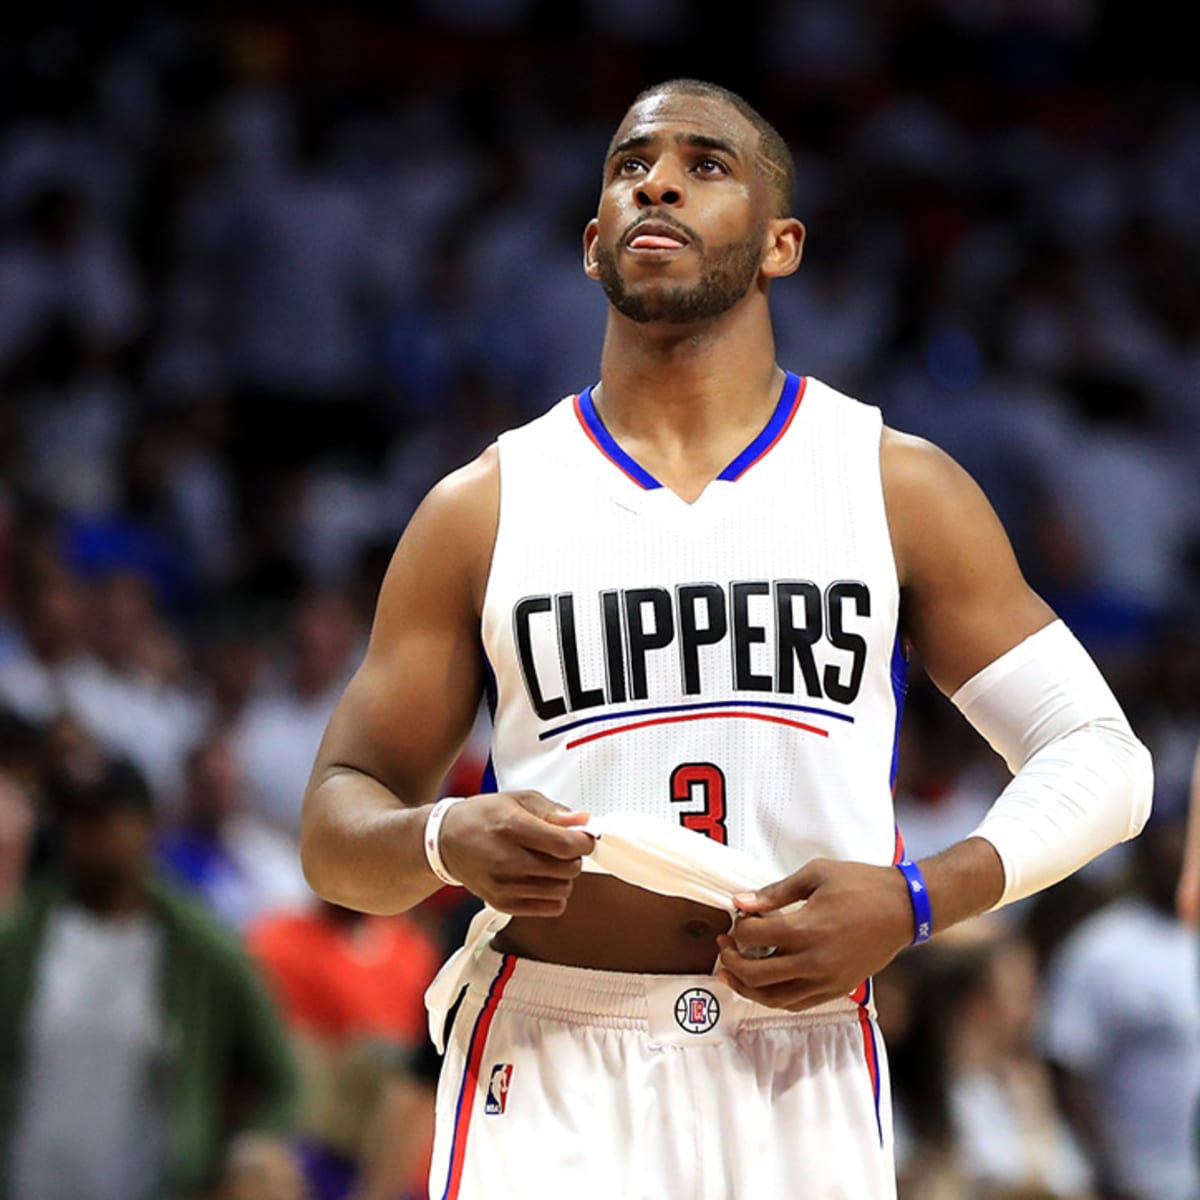 The ripple effect of a Chris Paul trade between the Thunder and Knicks